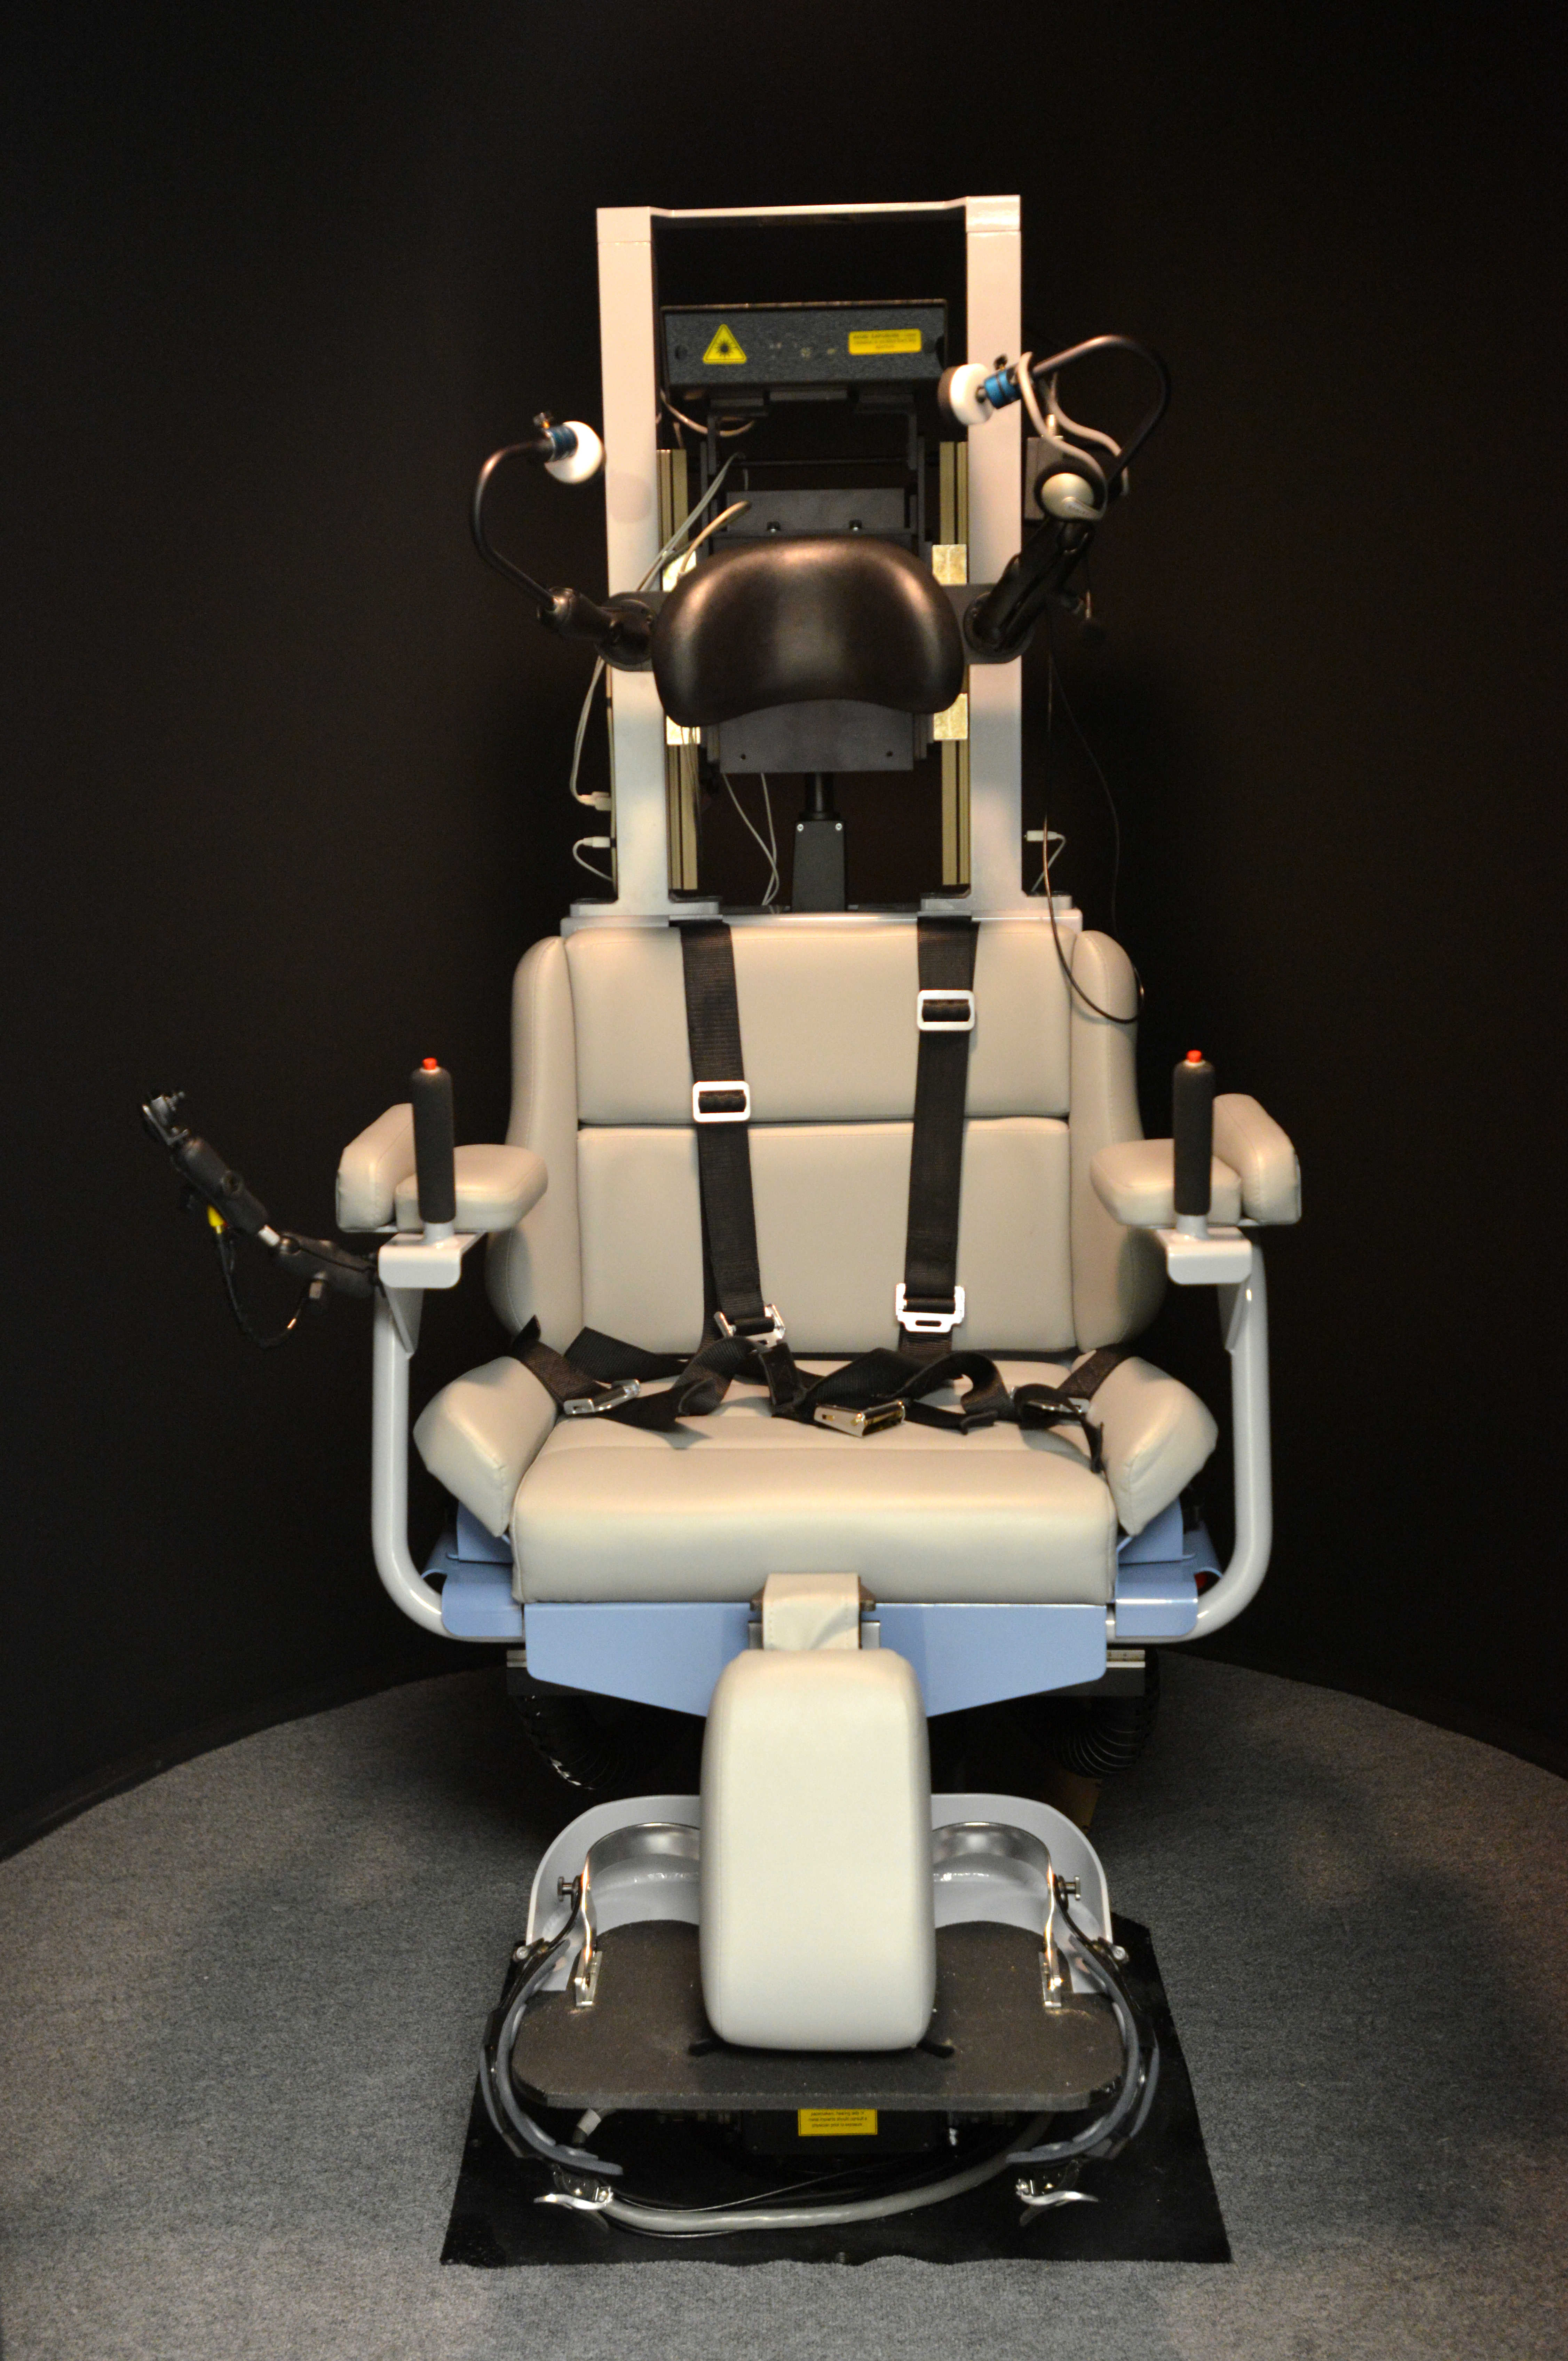 New rotary chair helps better diagnose patients at Baylor College of Medicine's Center for Balance Disorder.